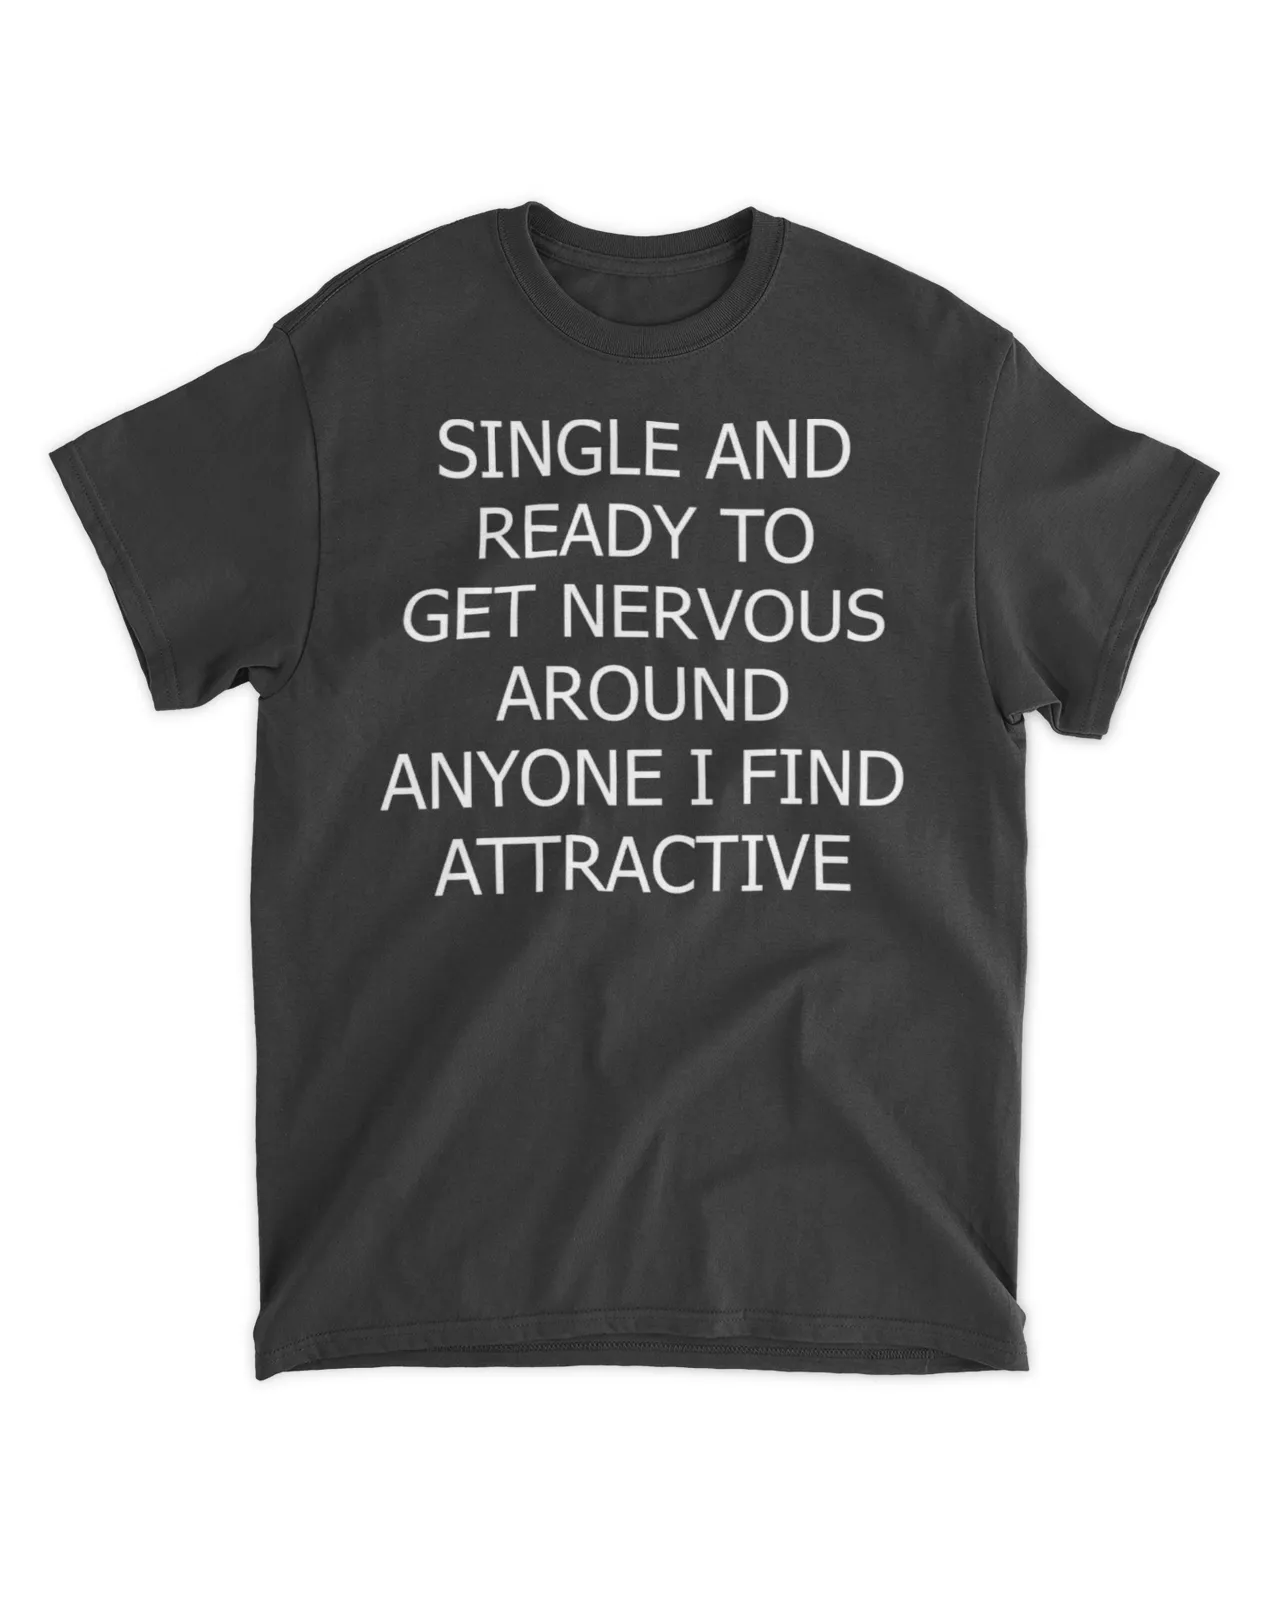  Single and ready to get nervous around anyone i find attractive shirt